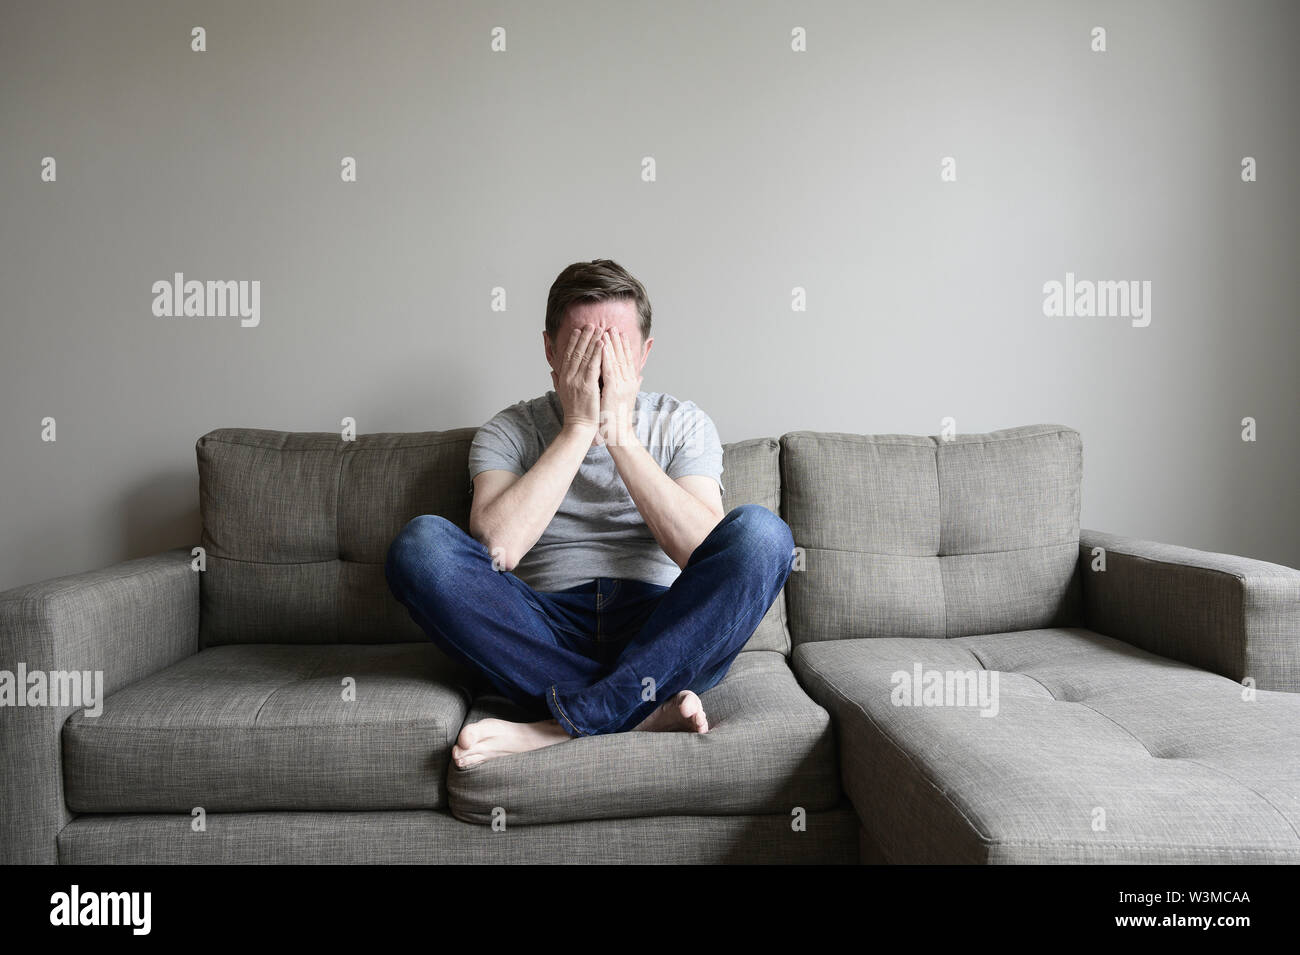 Depressed mature man sitting on couch Stock Photo